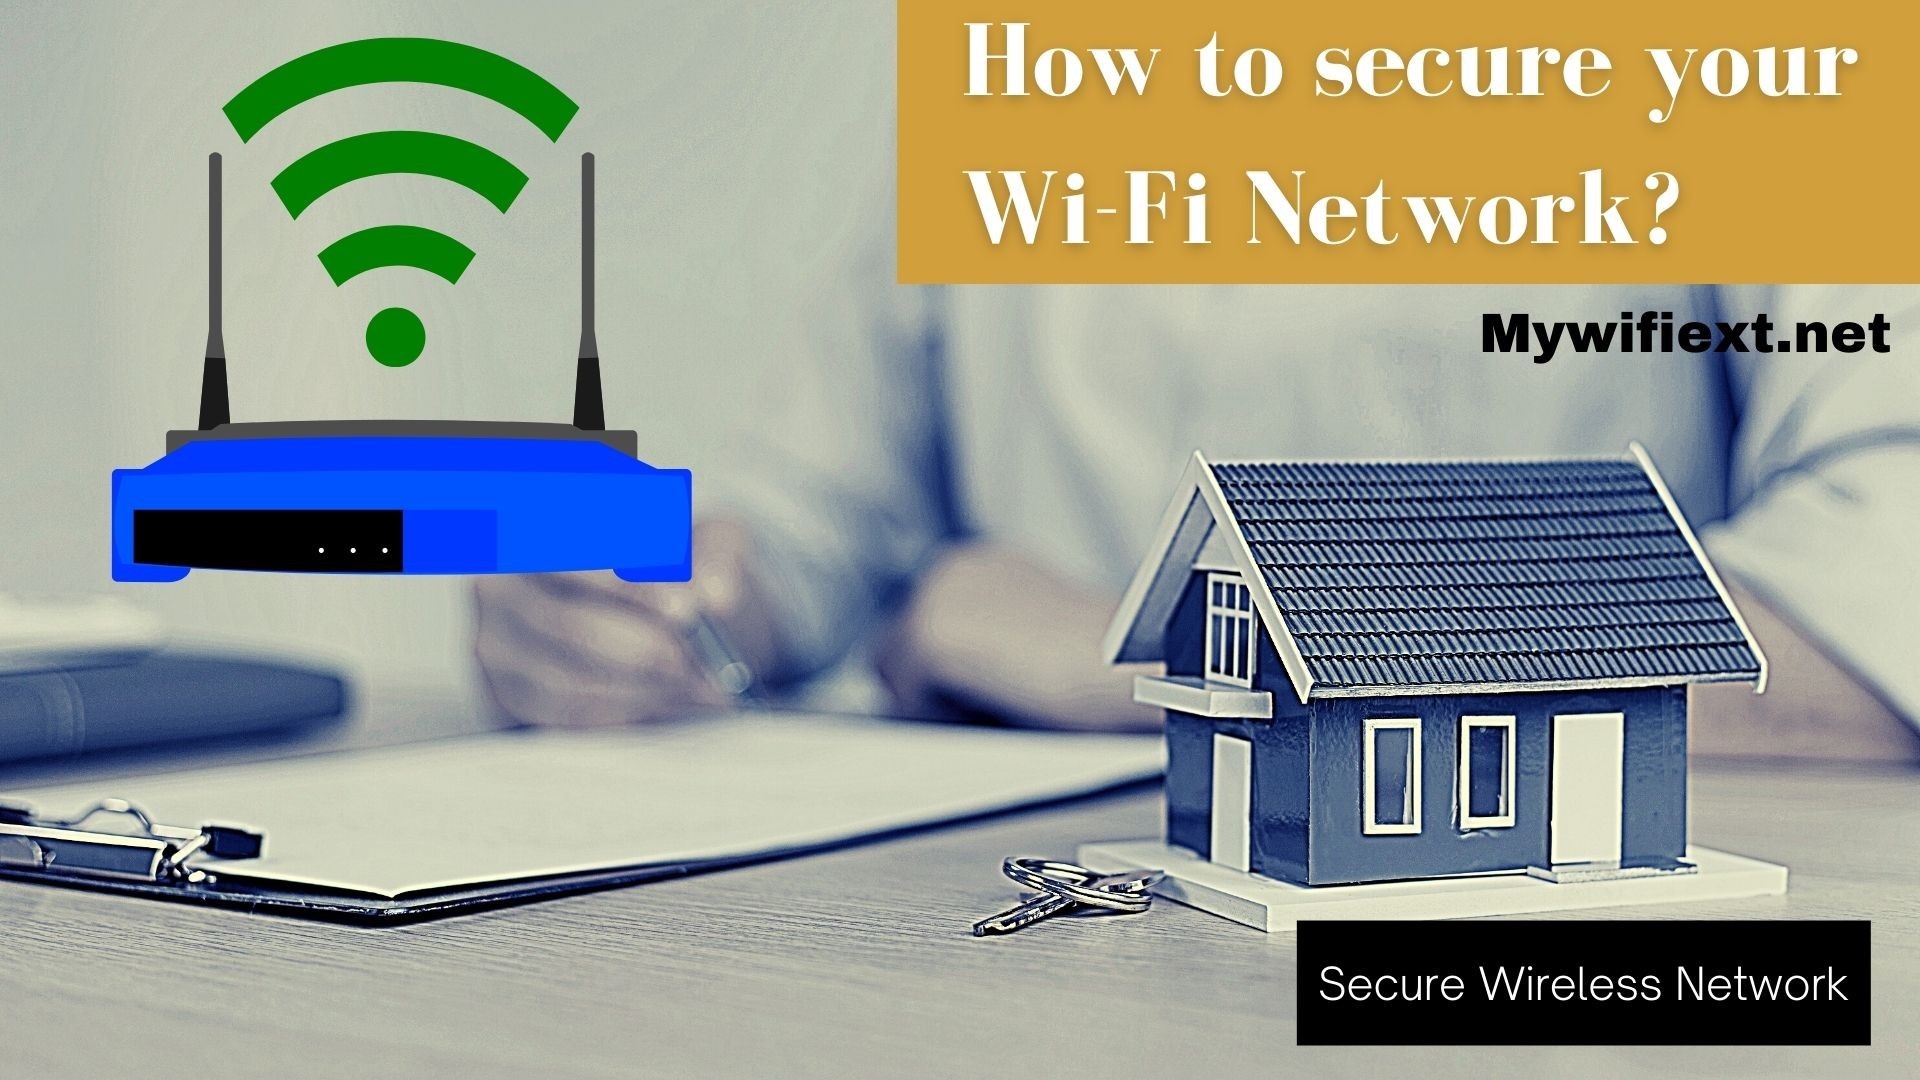 How to secure your Wi-Fi Network? mywifiext.net